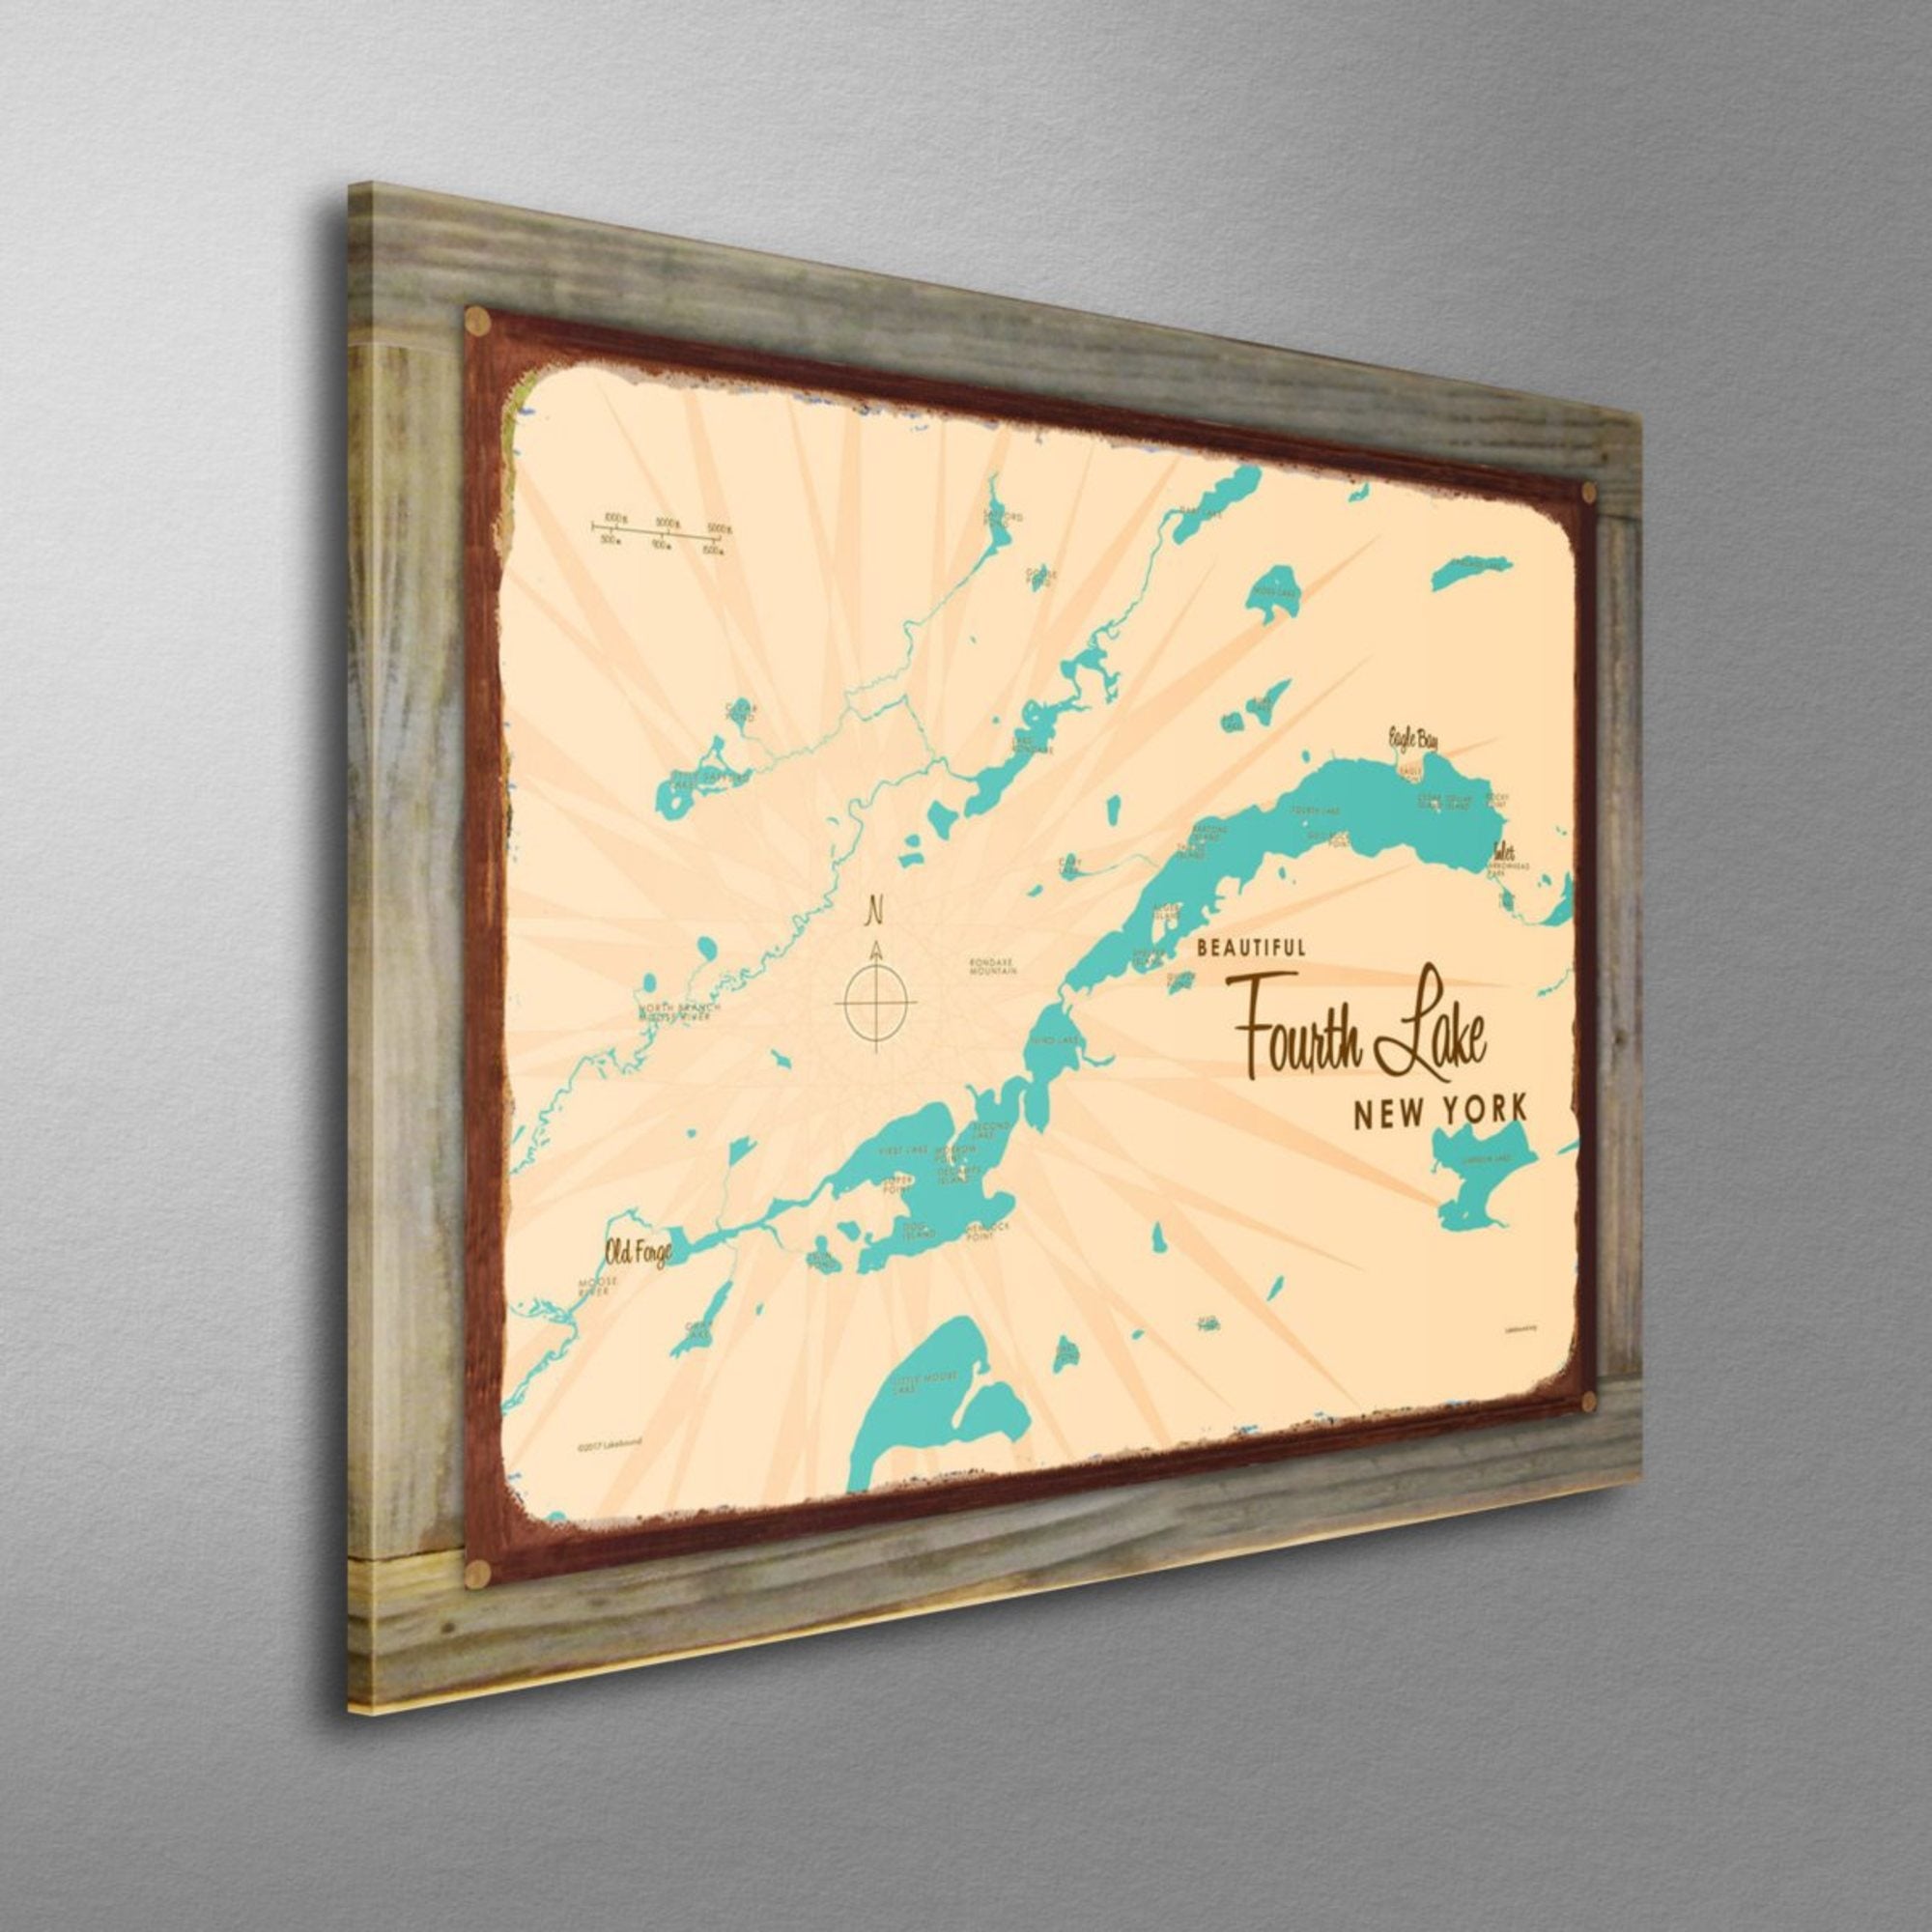 Fourth Lake New York (Herkimer County), Wood-Mounted Rustic Metal Sign Map Art